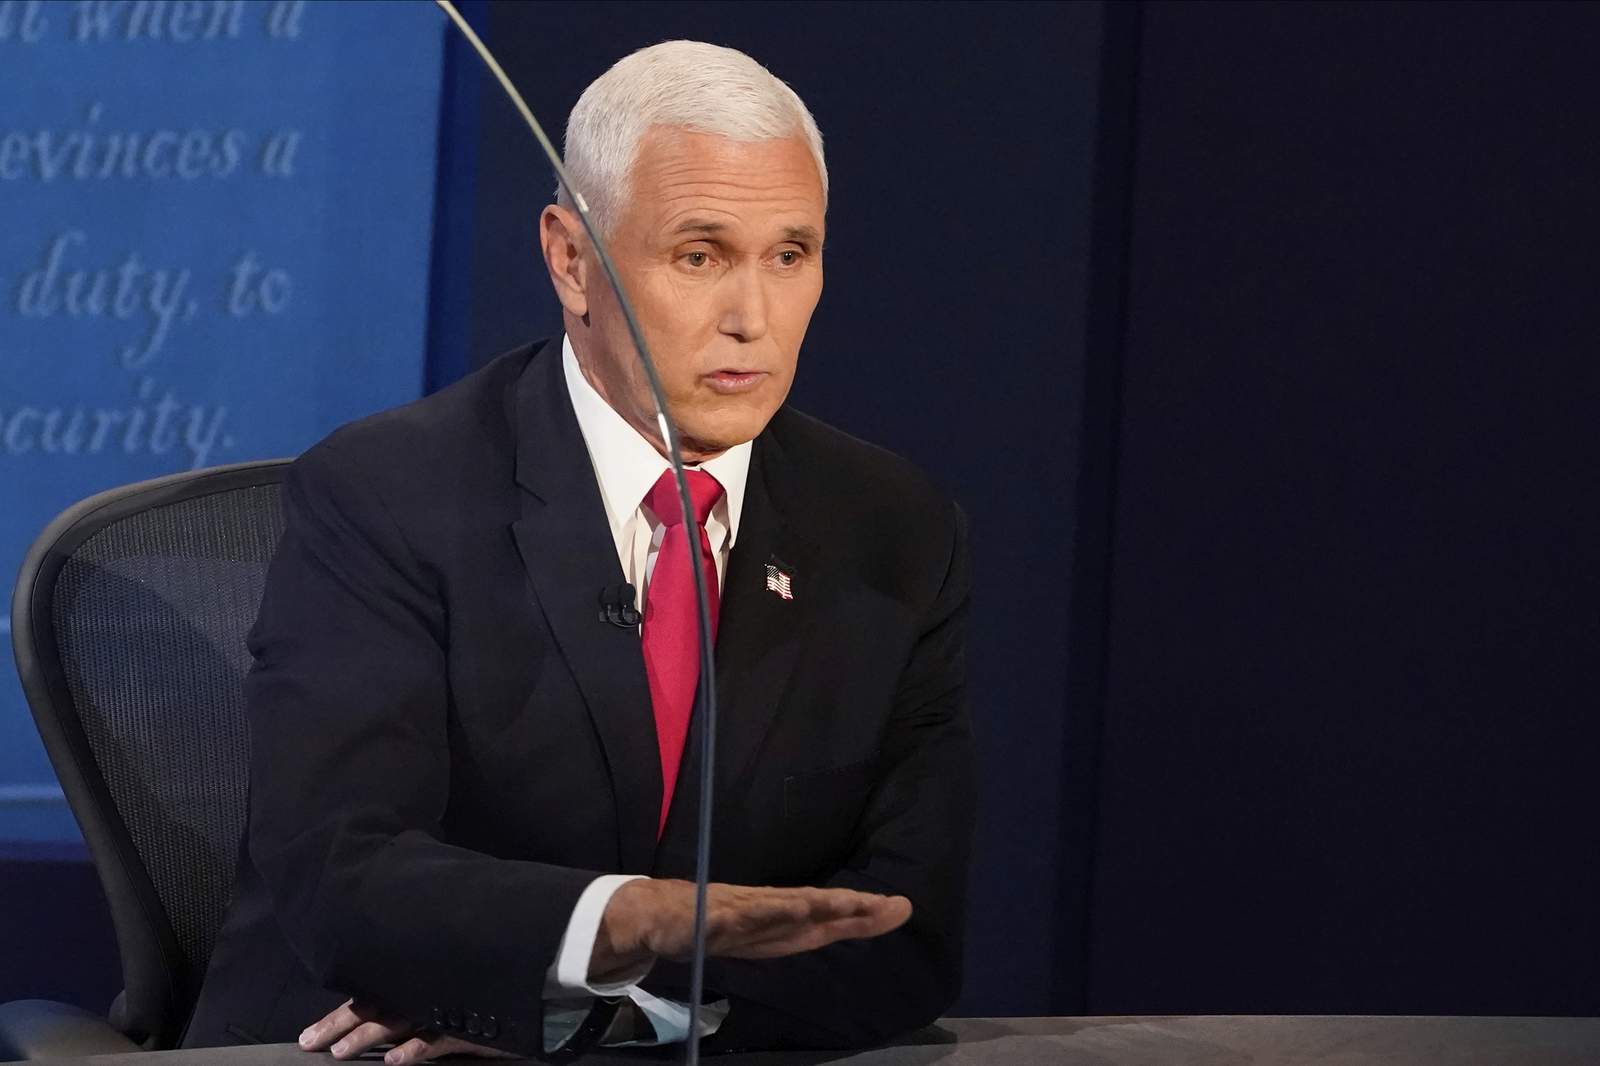 Trust Index: Pence accuses Democrats of trying to ‘overturn’ 2016 election